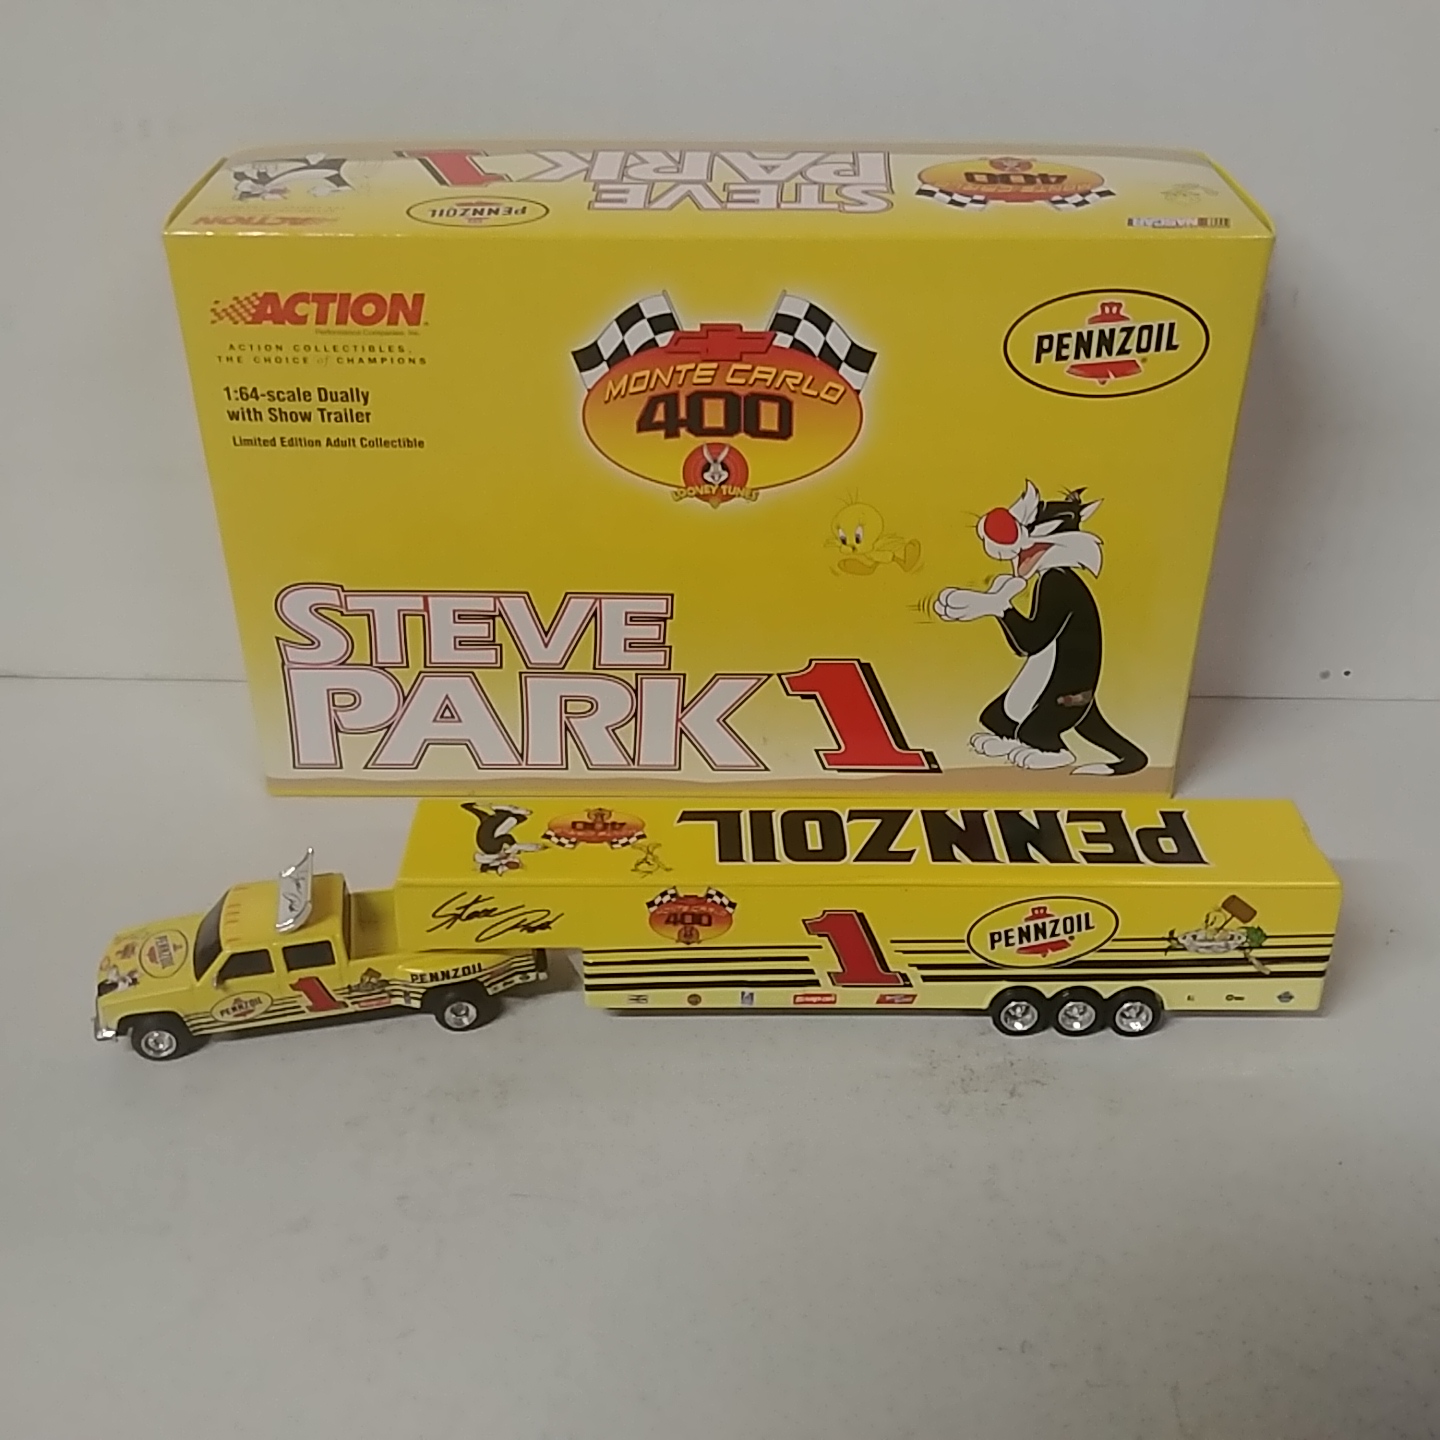 2001 Steve Park 1/64th Pennzoil "Looney Tunes" dually with trailer